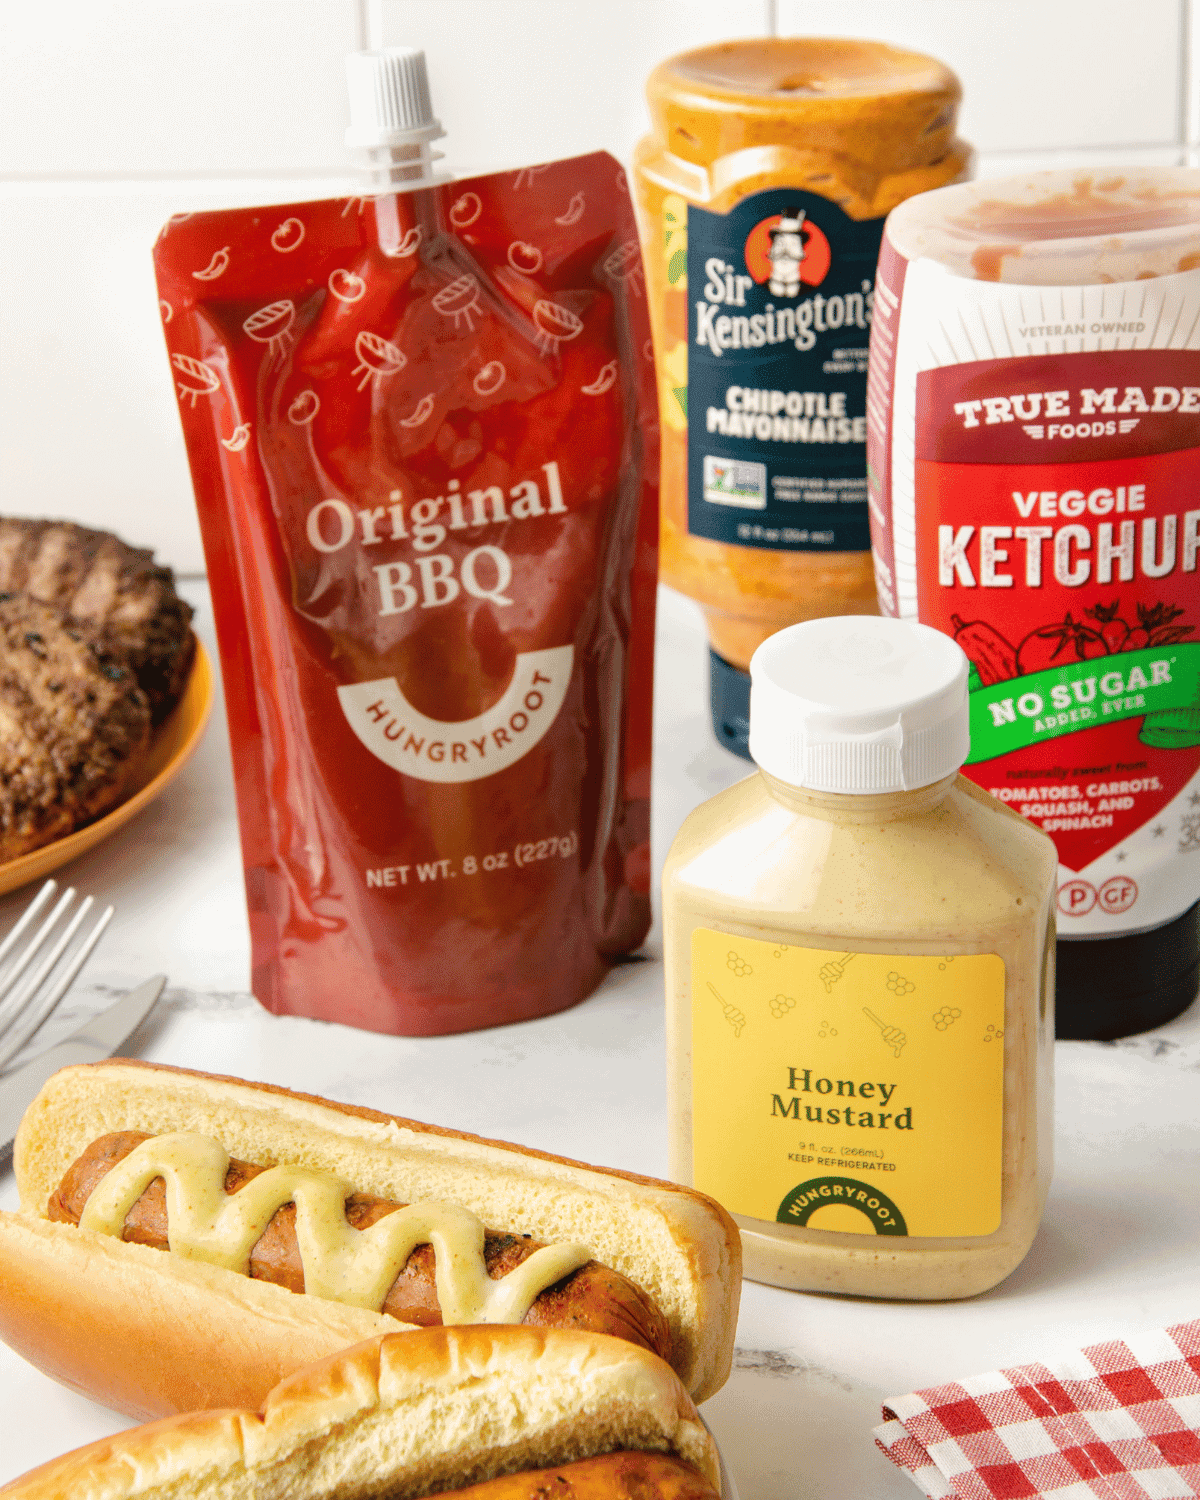 A lineup of Hungryroot's condiments behind a hot dog in a bun with mustard.